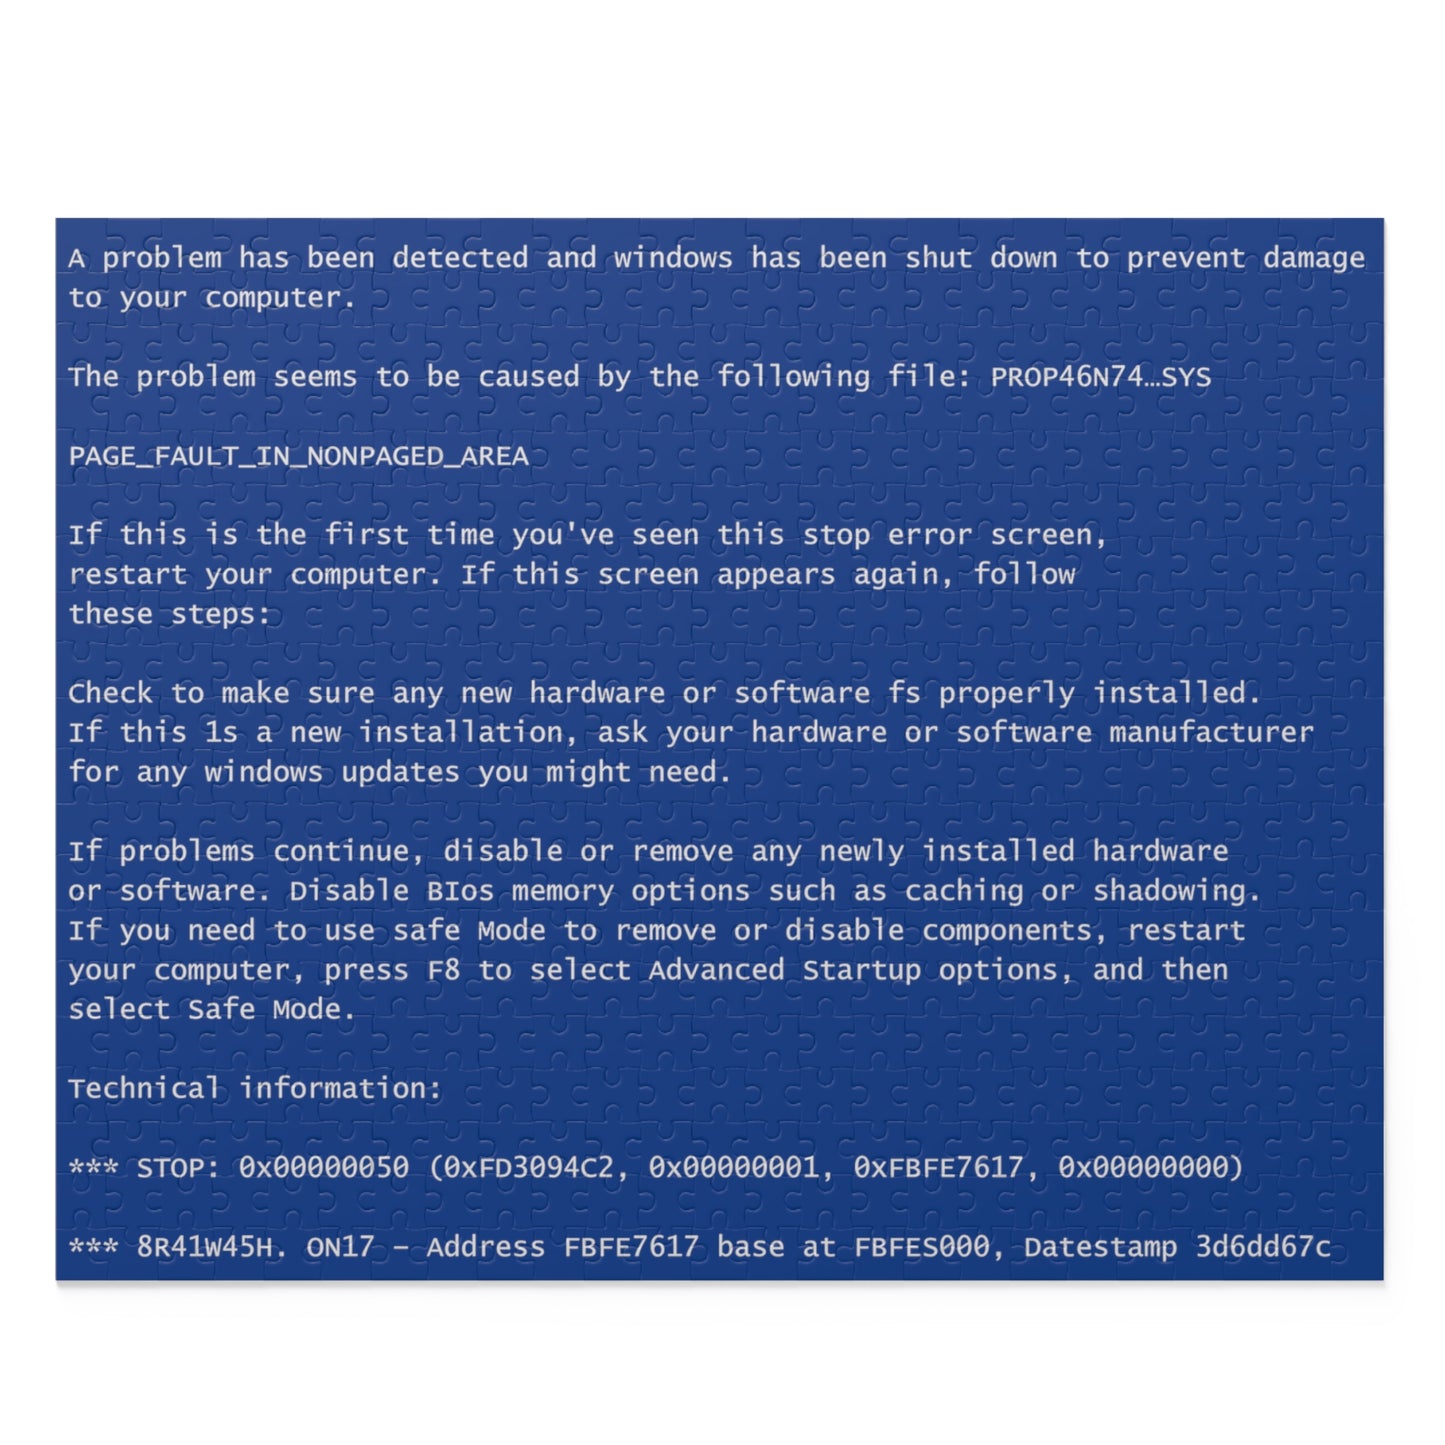 BSoD (Blue Screen of Death) Jigsaw Puzzle